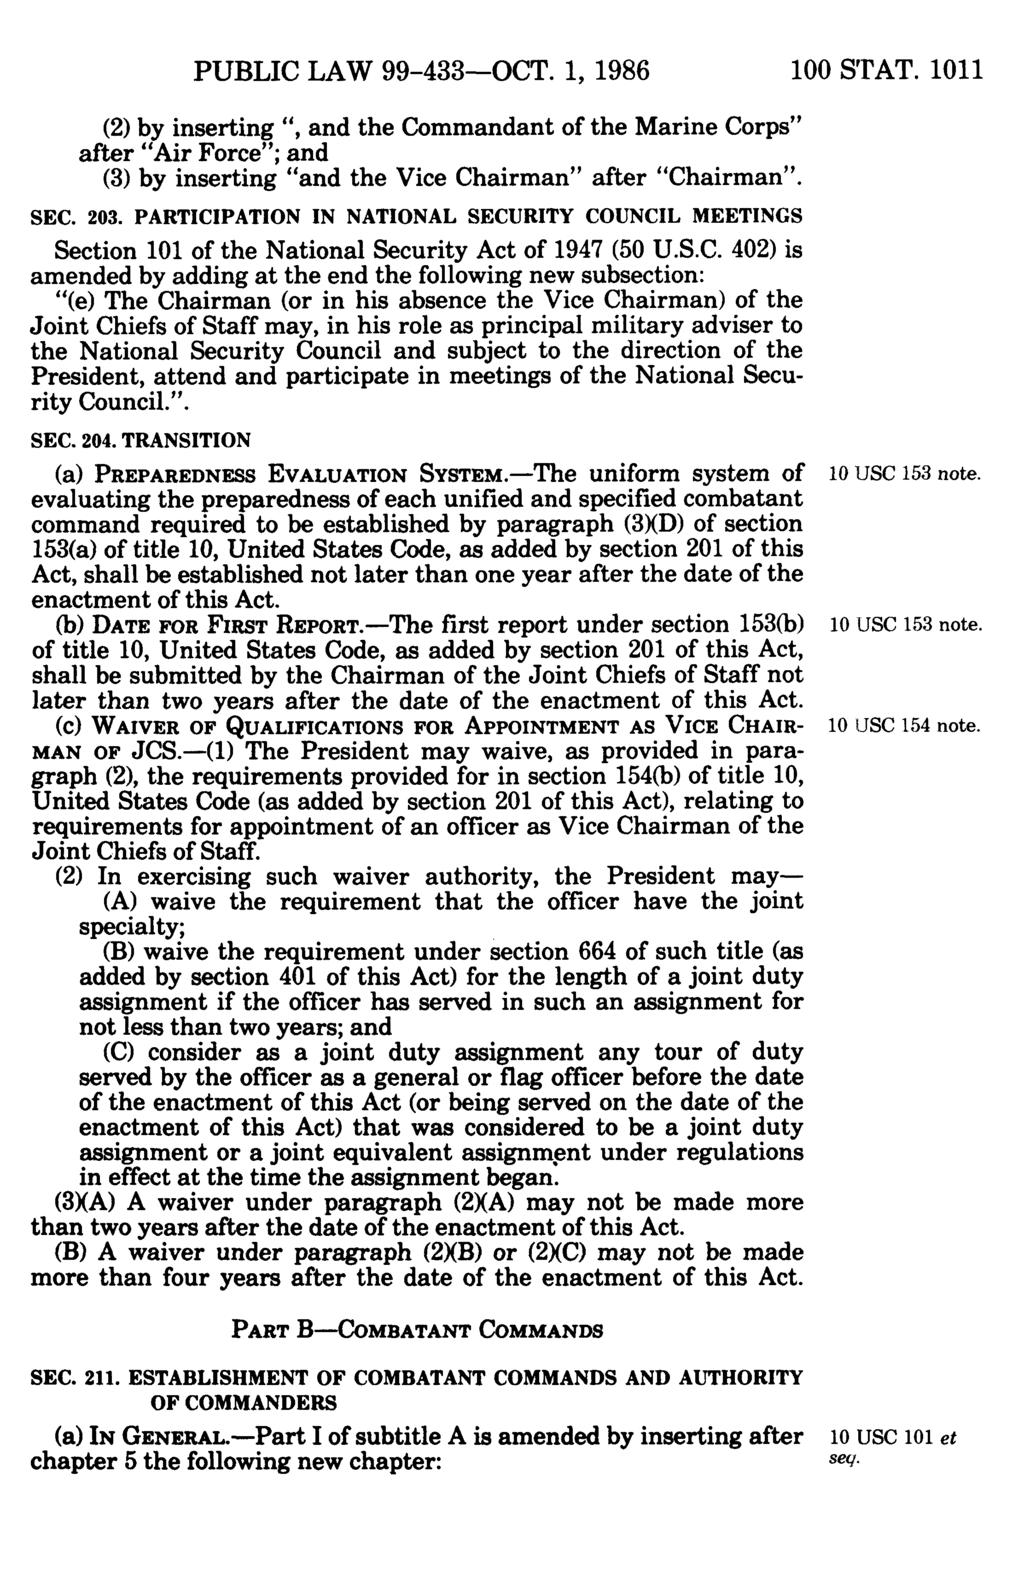 PUBLIC LAW 99-433-OCT. 1, 1986 100 STAT. 1011 (2) by inserting, and the Commandant of the Marine Corps after Air Force ; and (3) by inserting and the Vice Chairman after Chairman. SEC. 203.